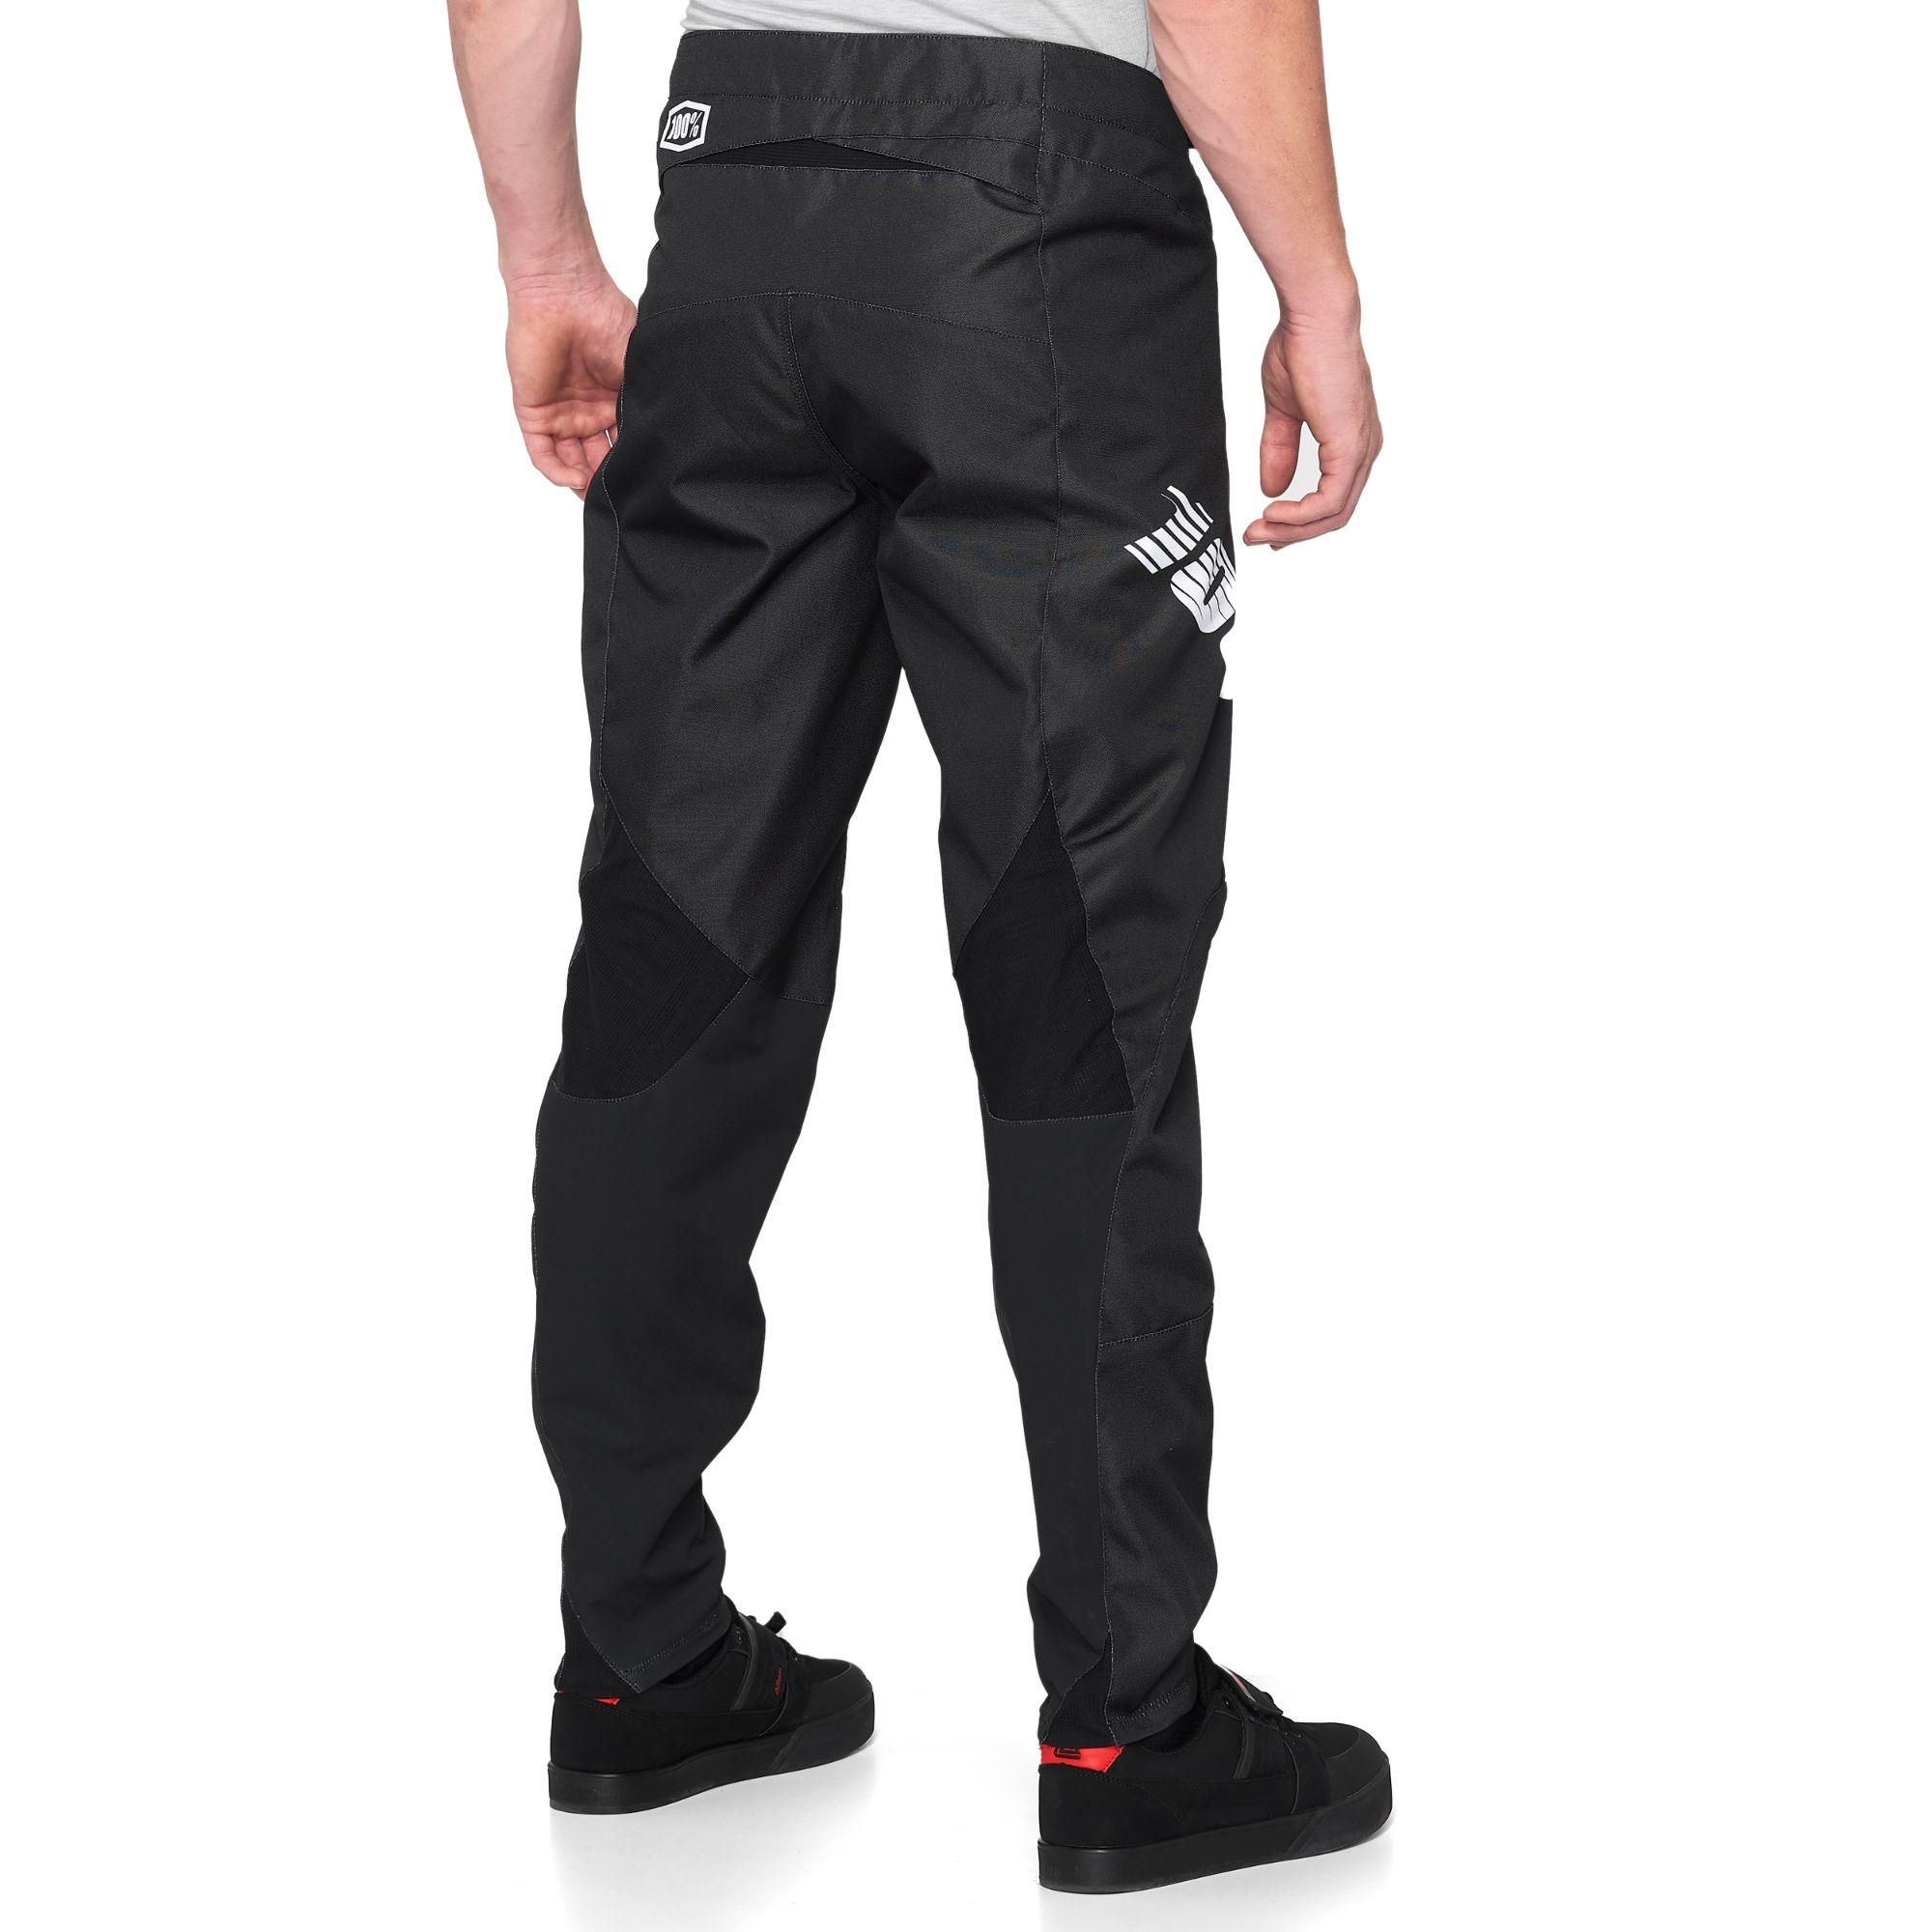 Dirección salud Triturado 100% R-CORE Downhill Pants Size 30" Only - £59.99 | Trousers | Cyclestore